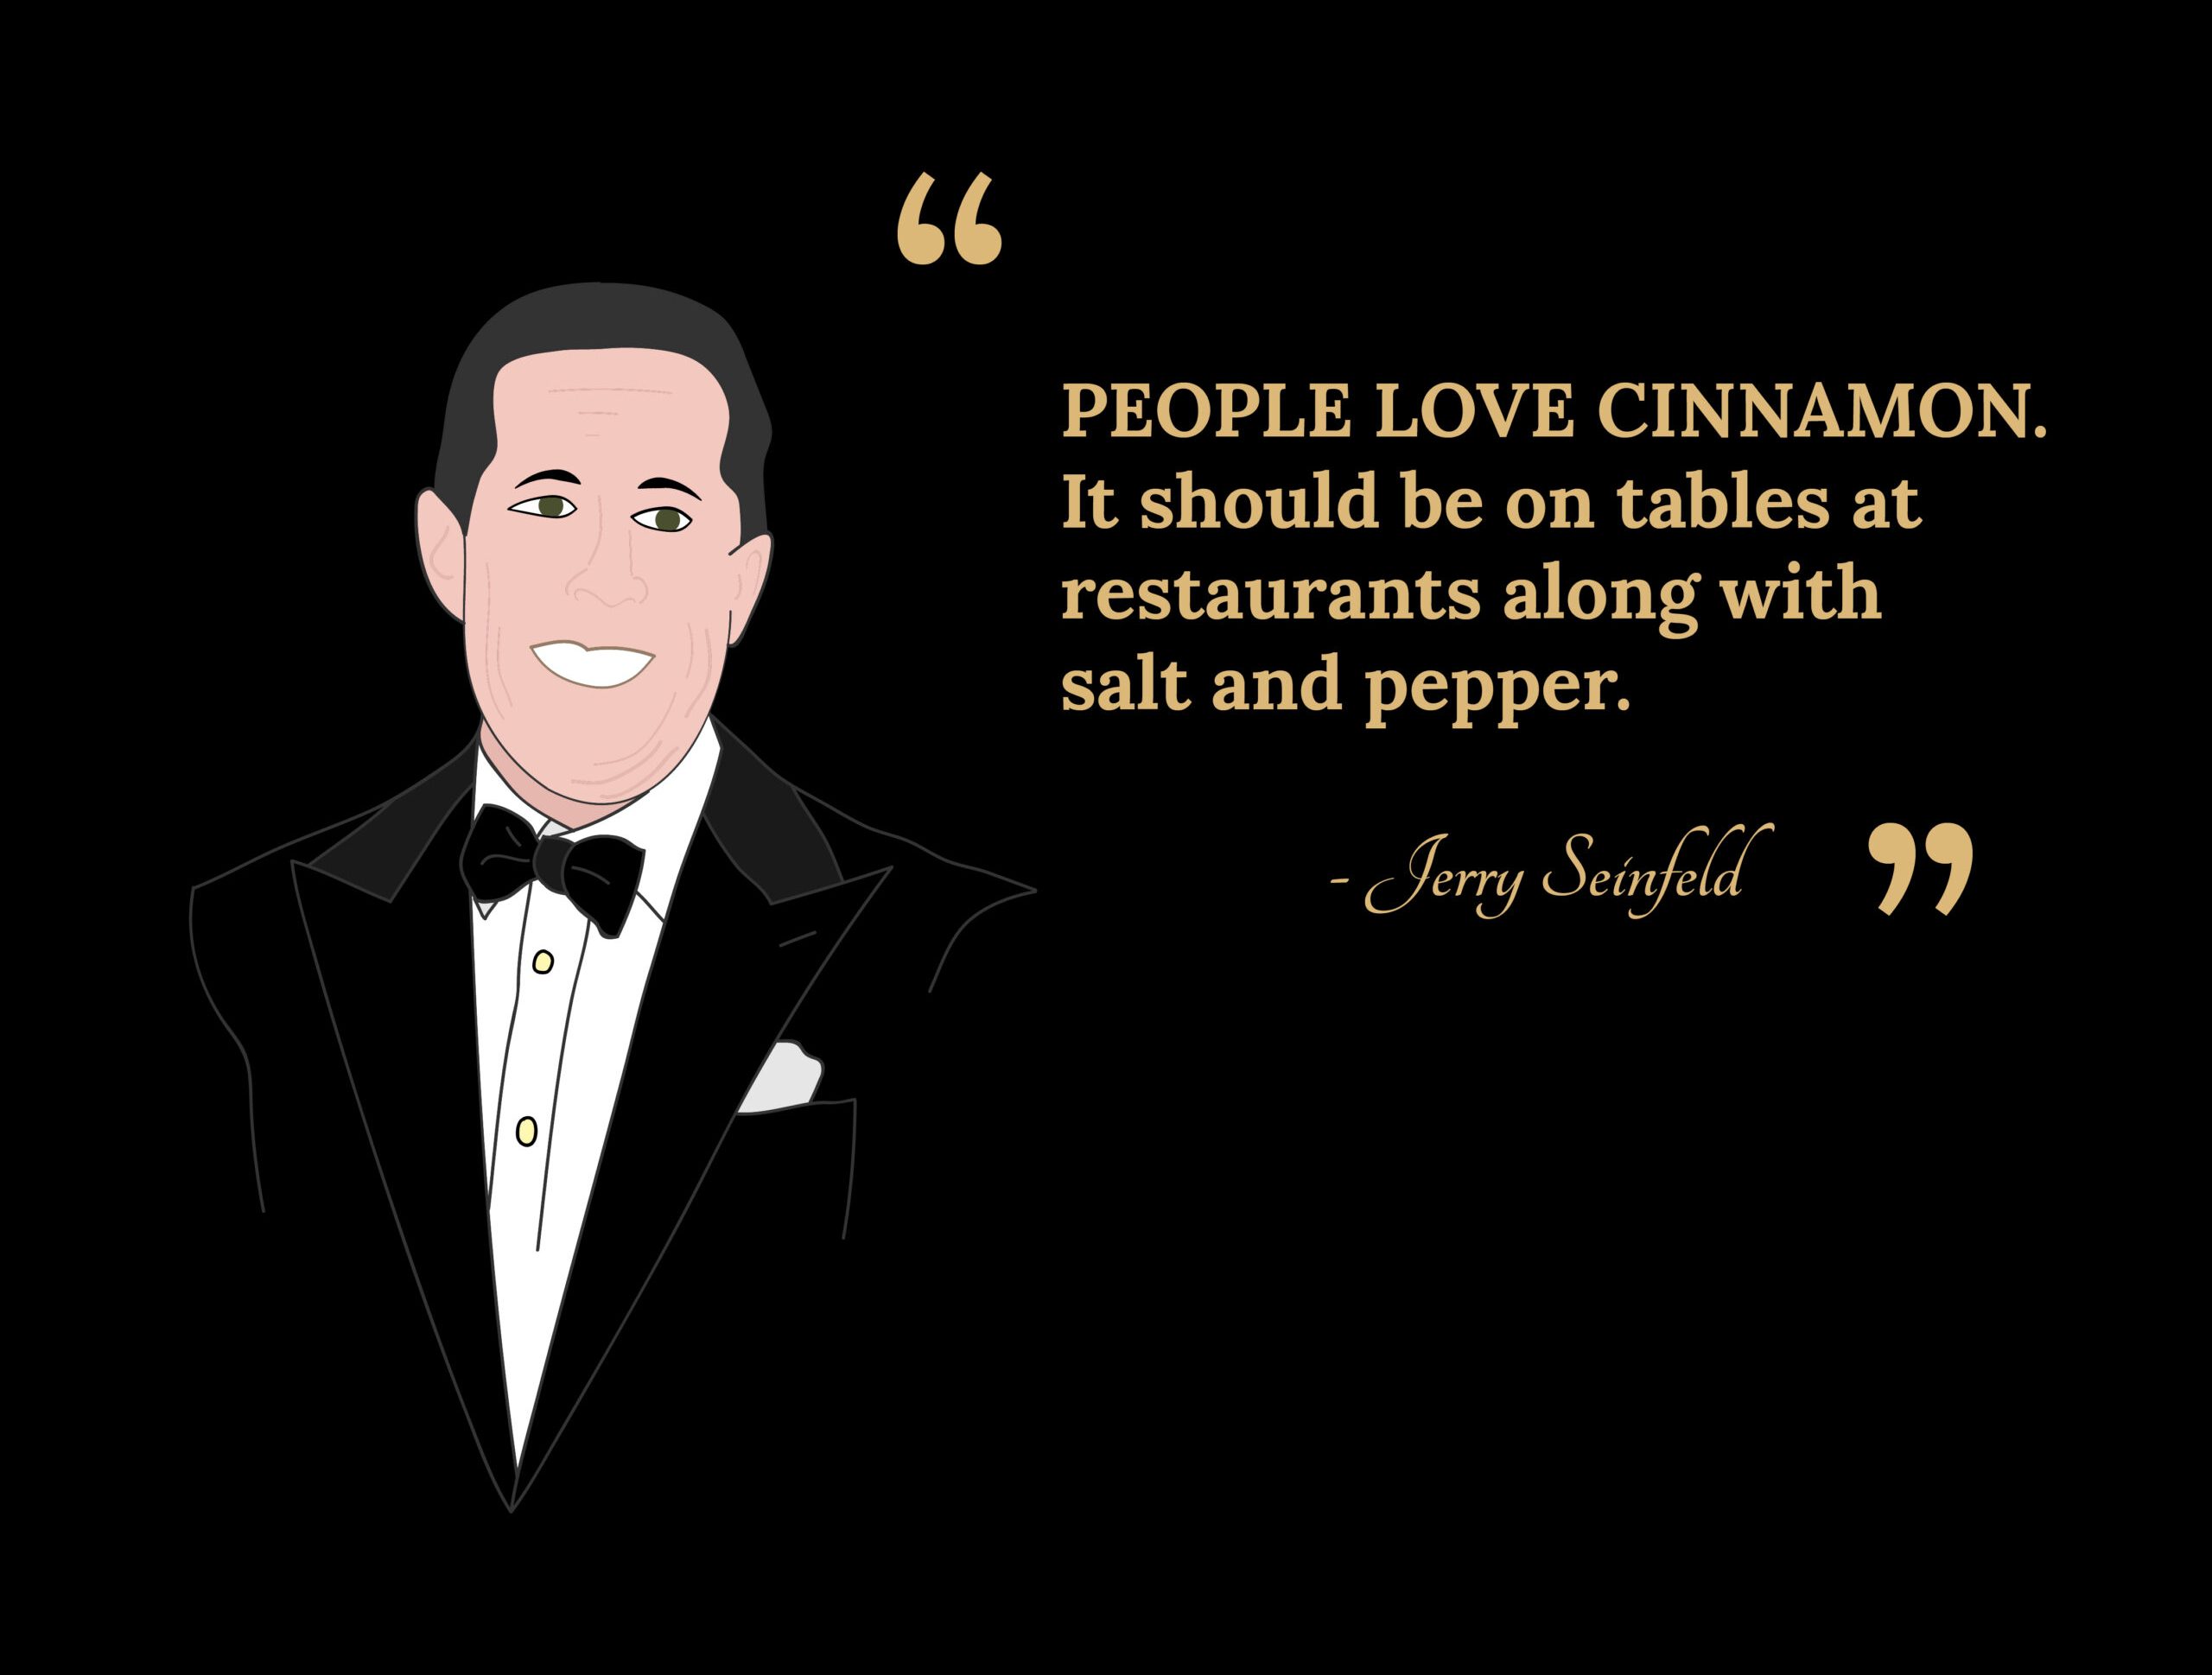 an illustration of Jerry Seinfeld with a quote about Cinnamon